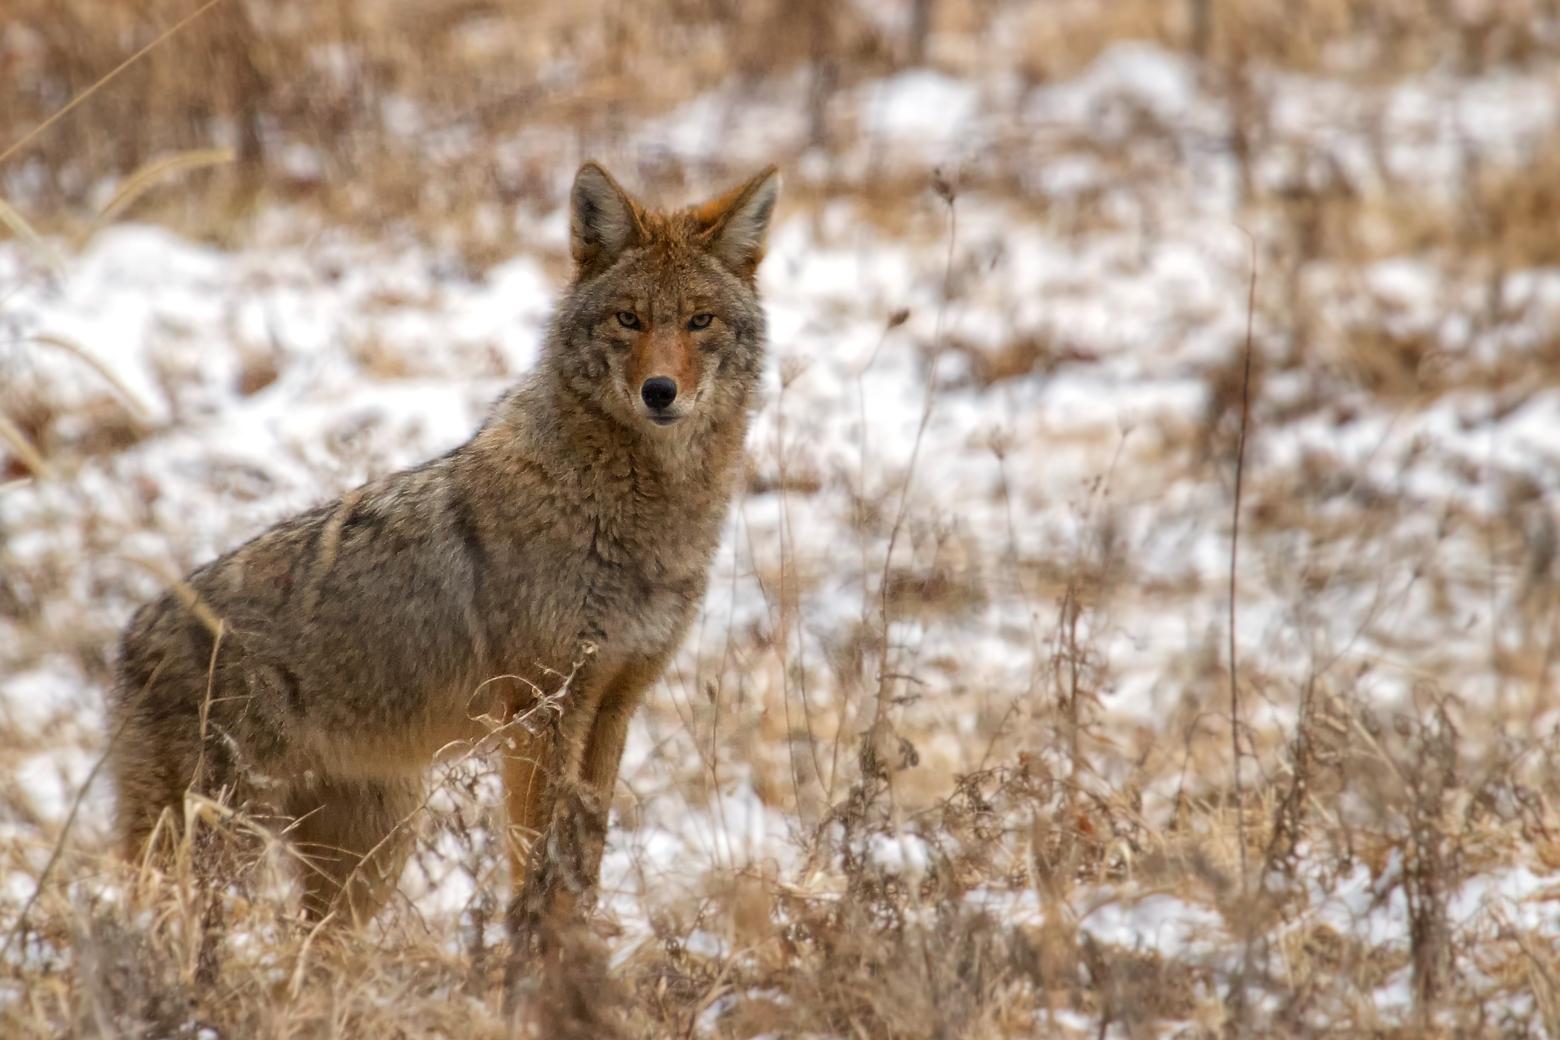 In 2019, former Montana Sen. Mike Phillips, also a renowned wildlife biologist who led the wolf reintroduction in Yellowstone National Park, introduced bills to outlaw running over coyotes with snowmobiles. It failed. Photo by Chris Smith/Creative Commons